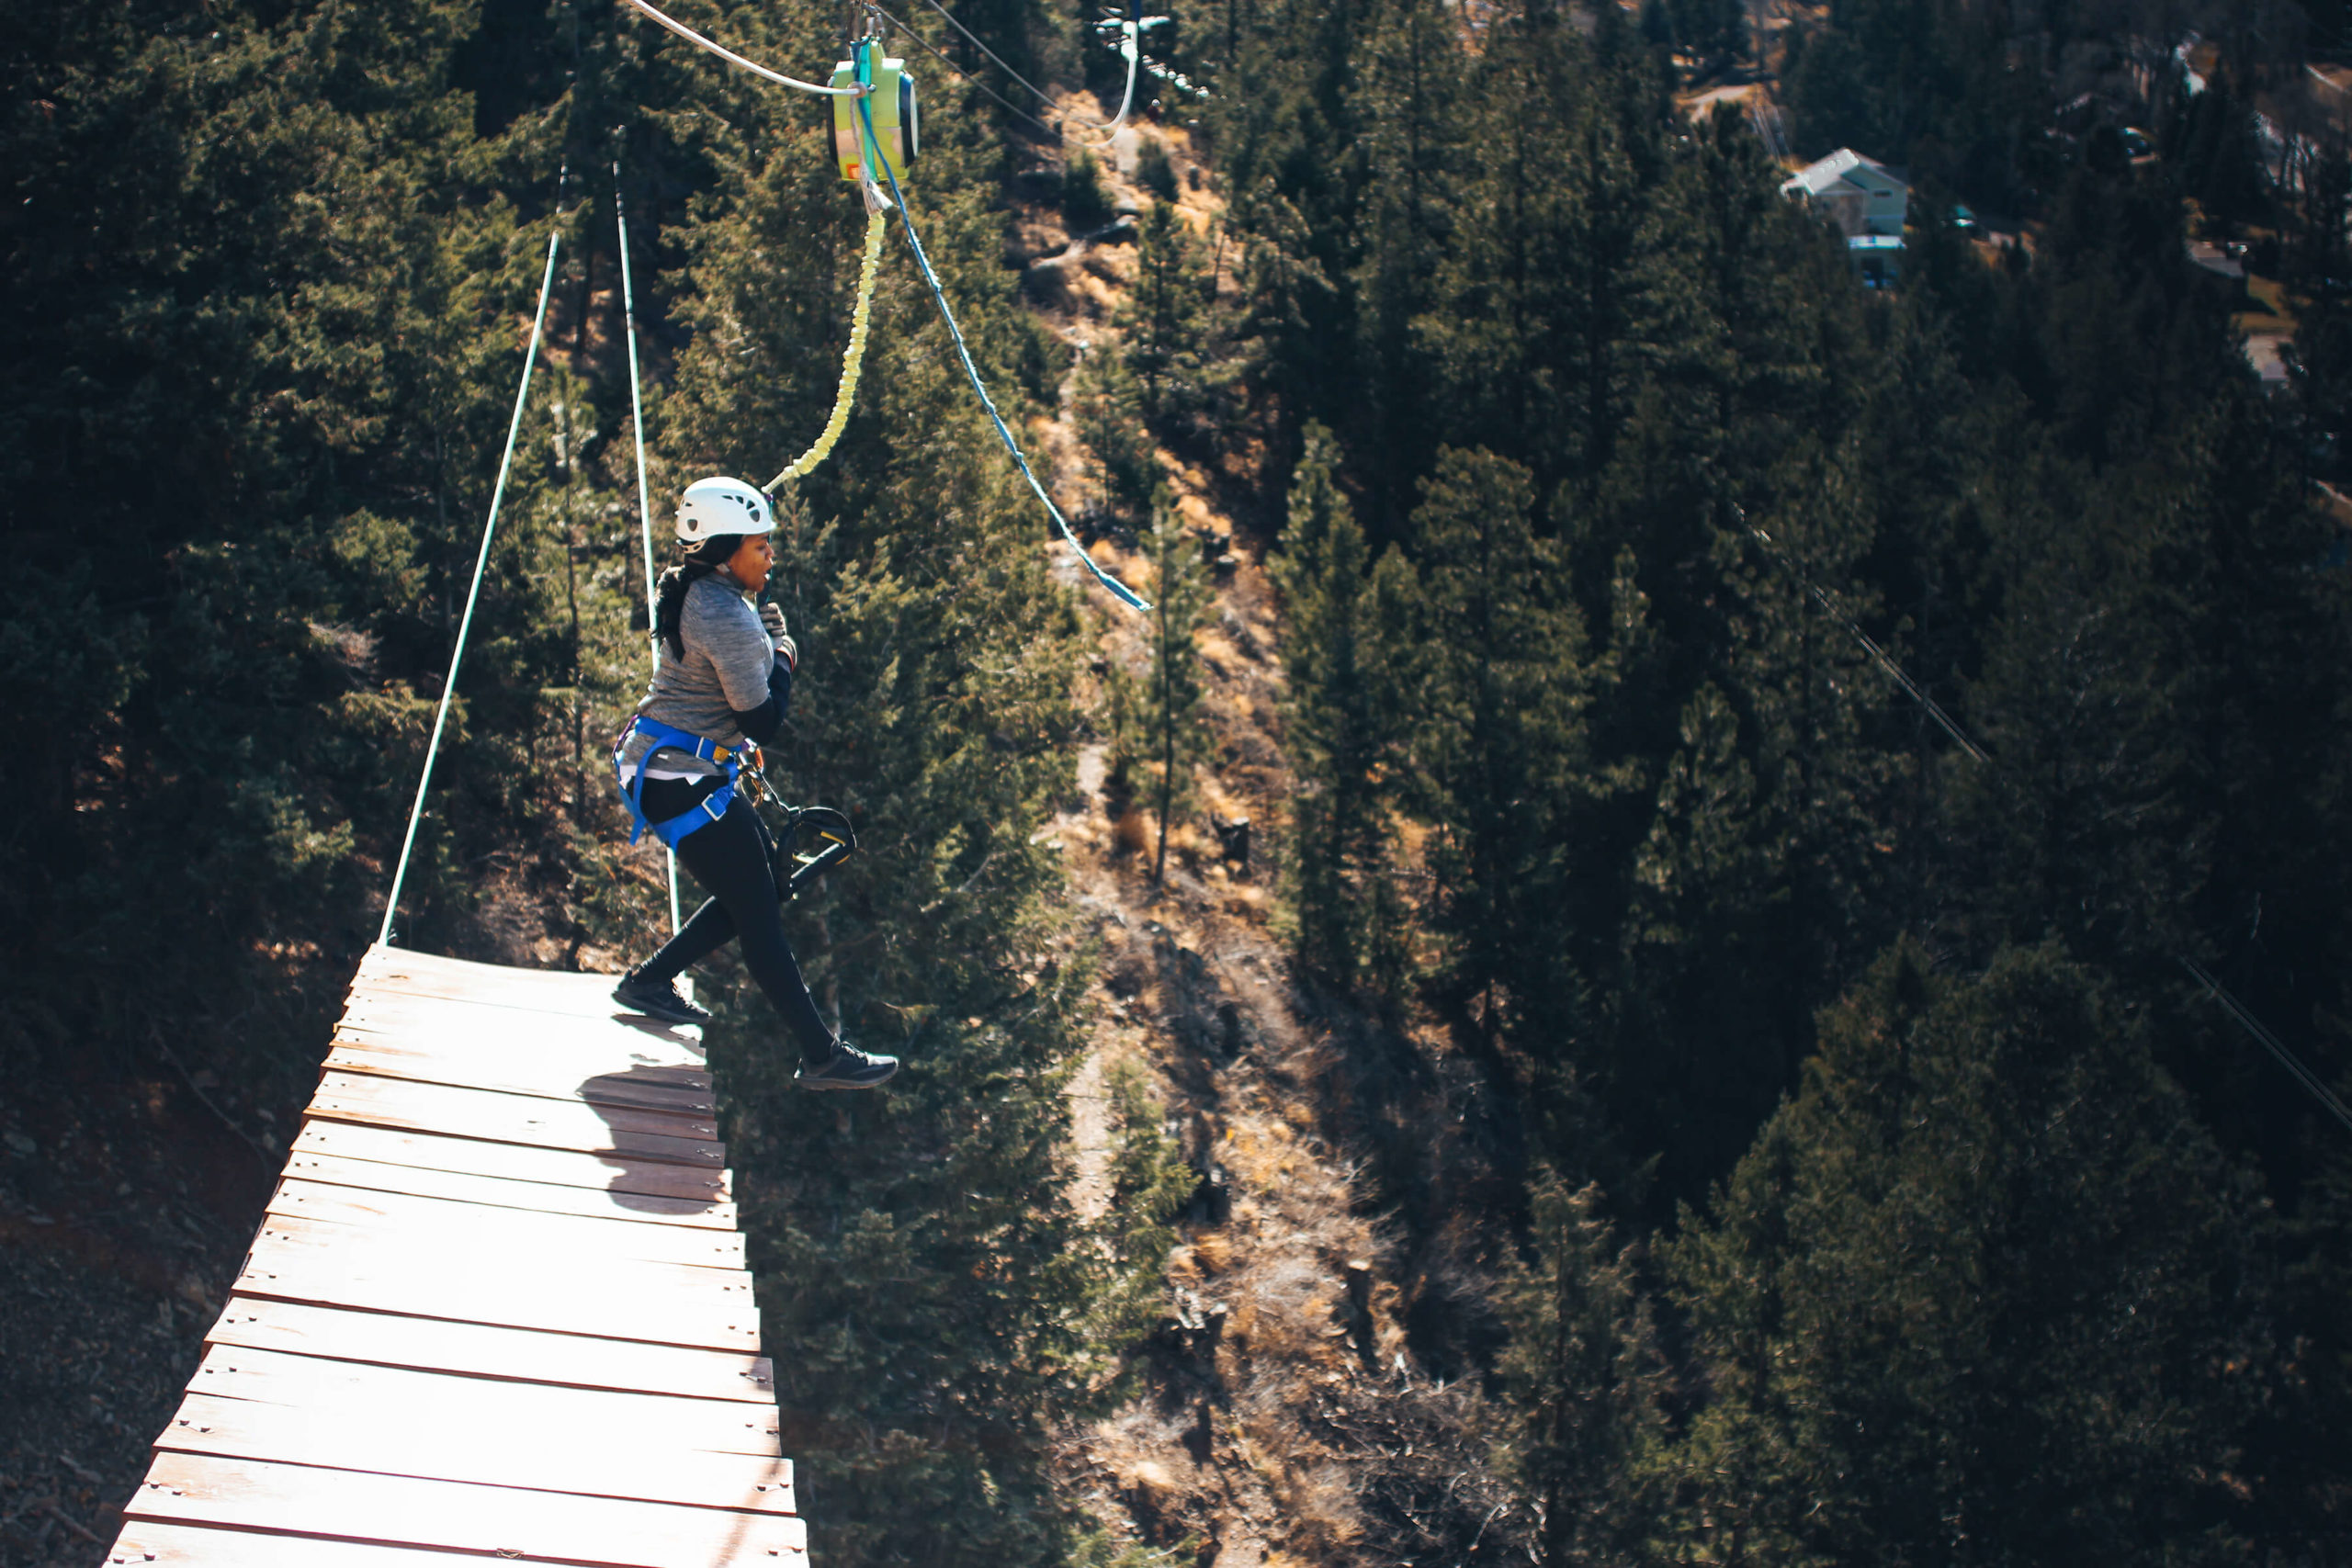 taking the leap on one of of AVA's ziplines outside Denver, Colorado